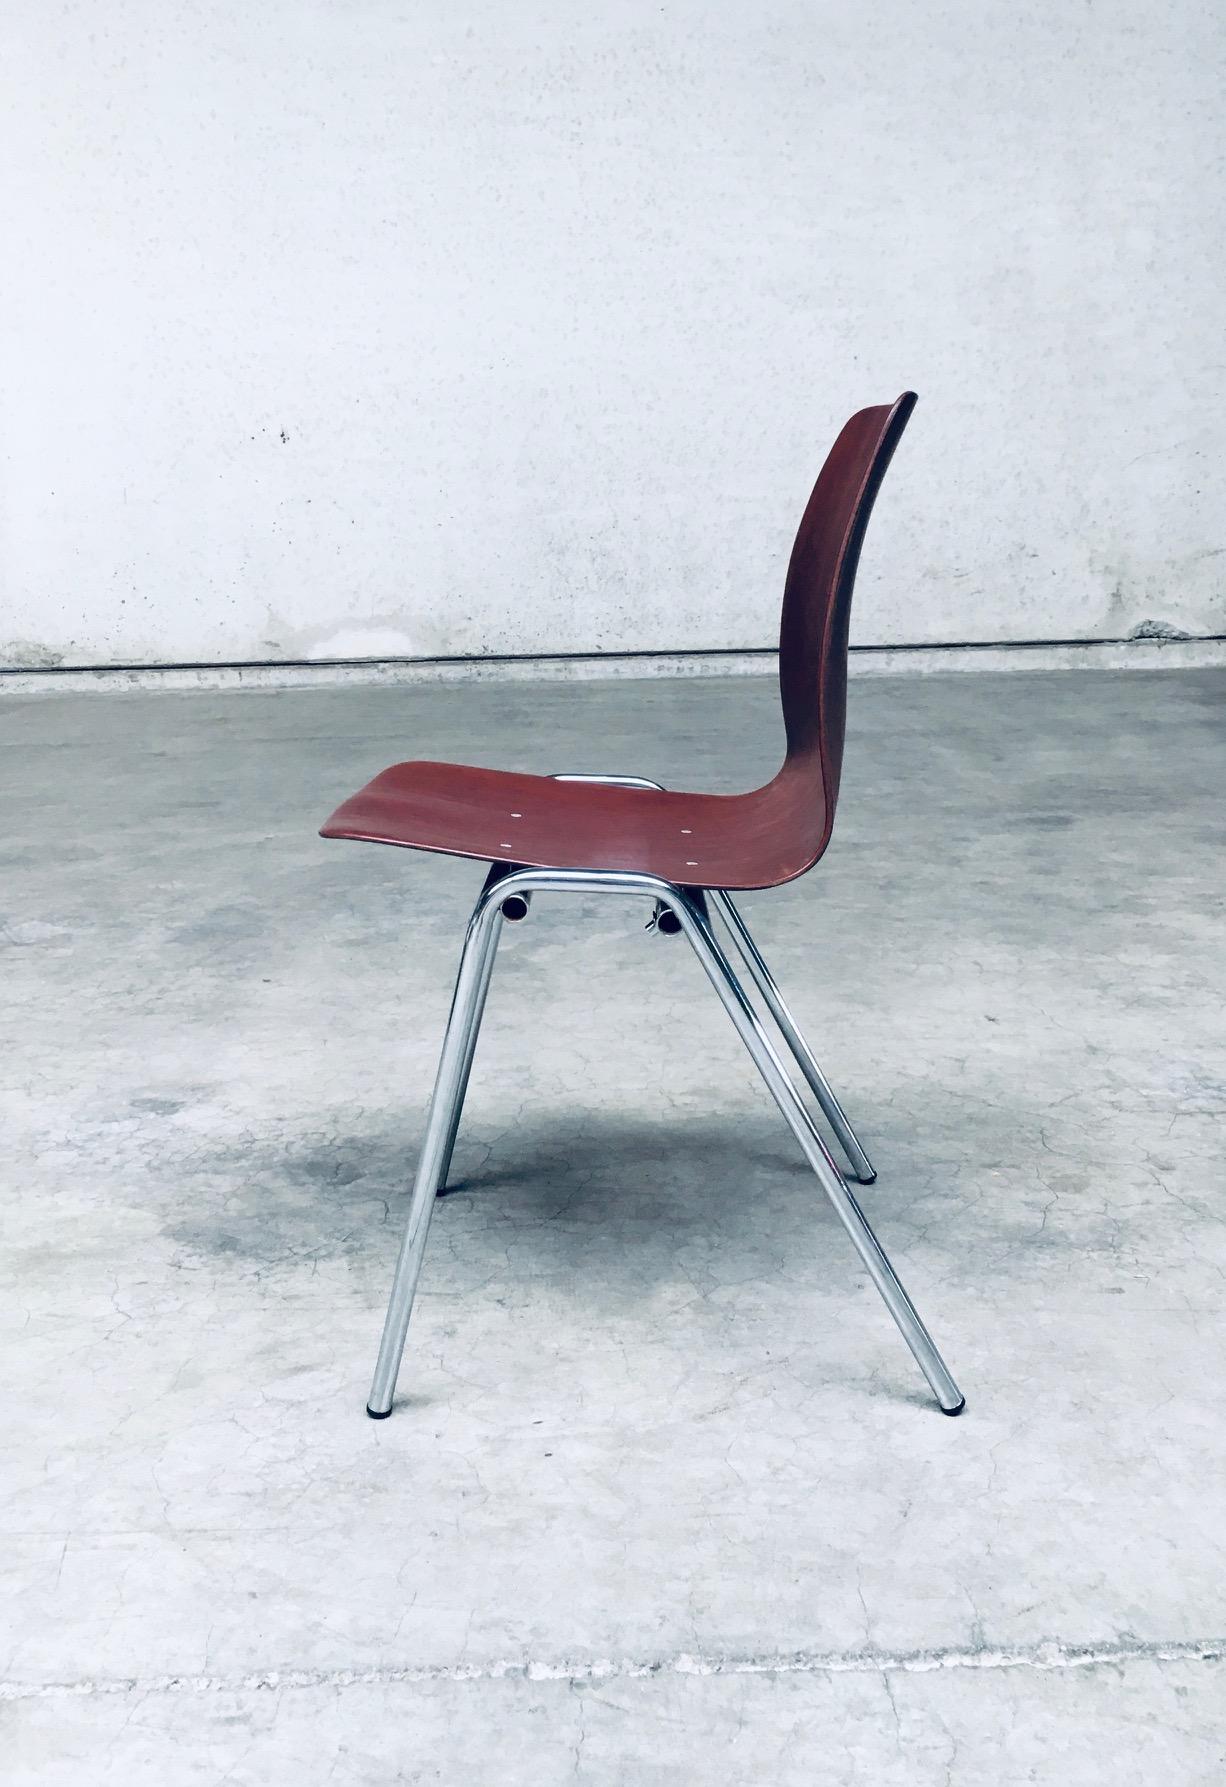 Midcentury Design Stacking Chairs by Elmar Flötotto for Pagholz, 1960's Germany For Sale 5